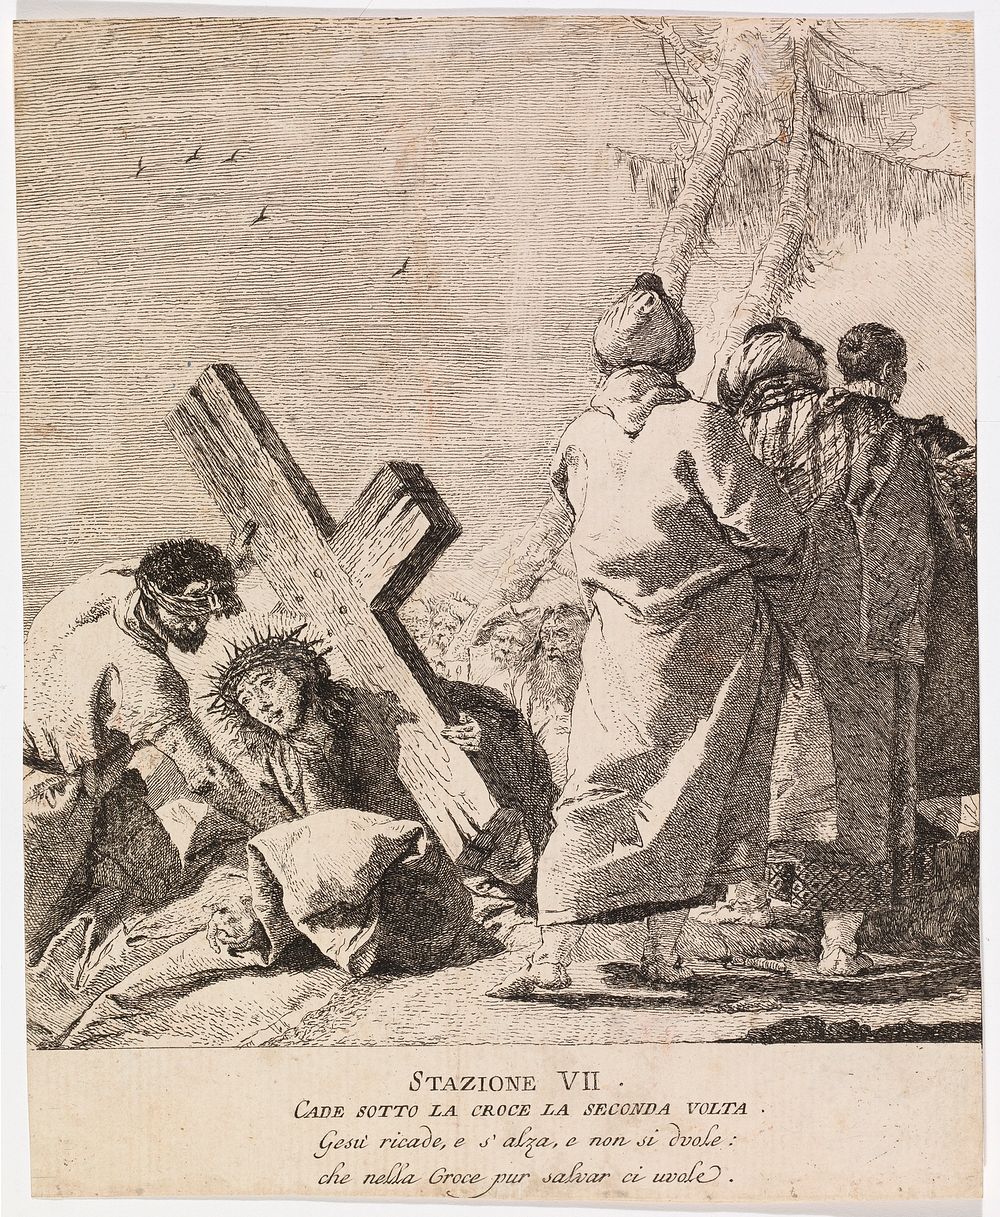 Via crucis - station vii. jesus falls for the second time, 1748 - 1749